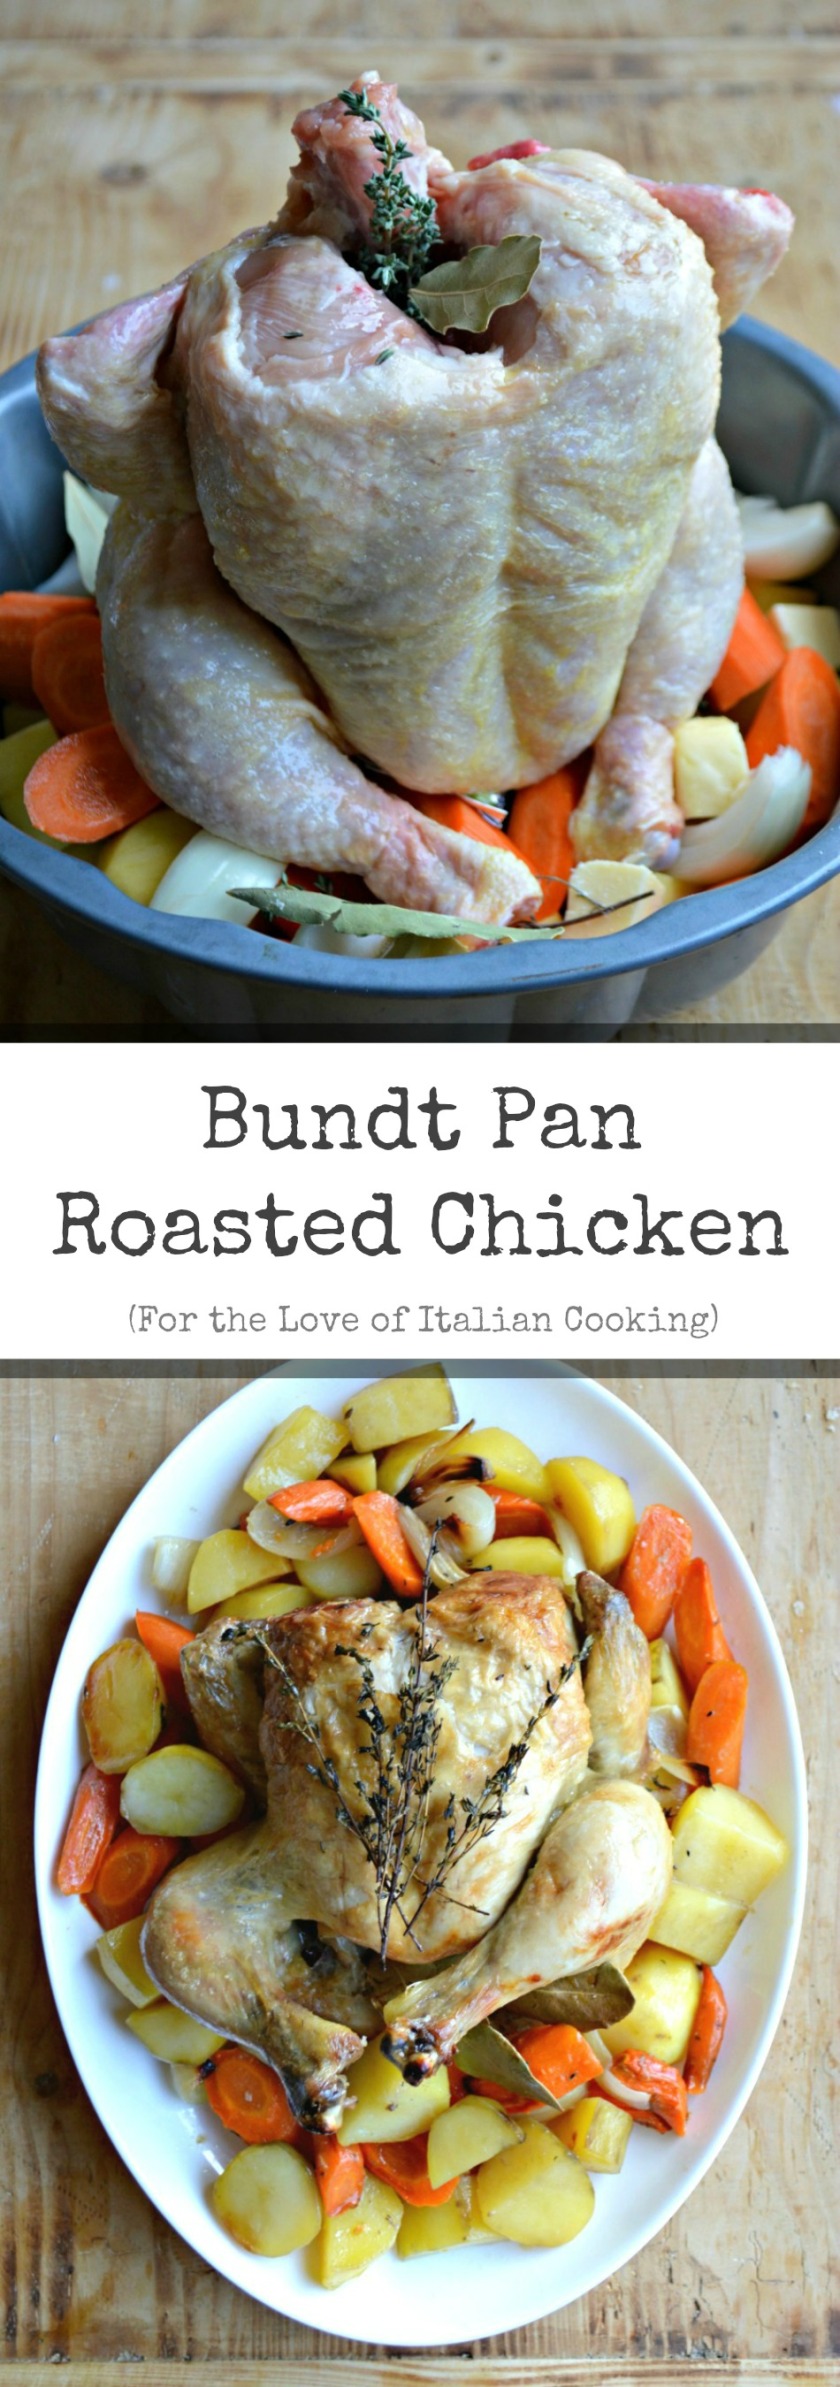 Bundt Pan Roasted Chicken For the Love of Italian Cooking